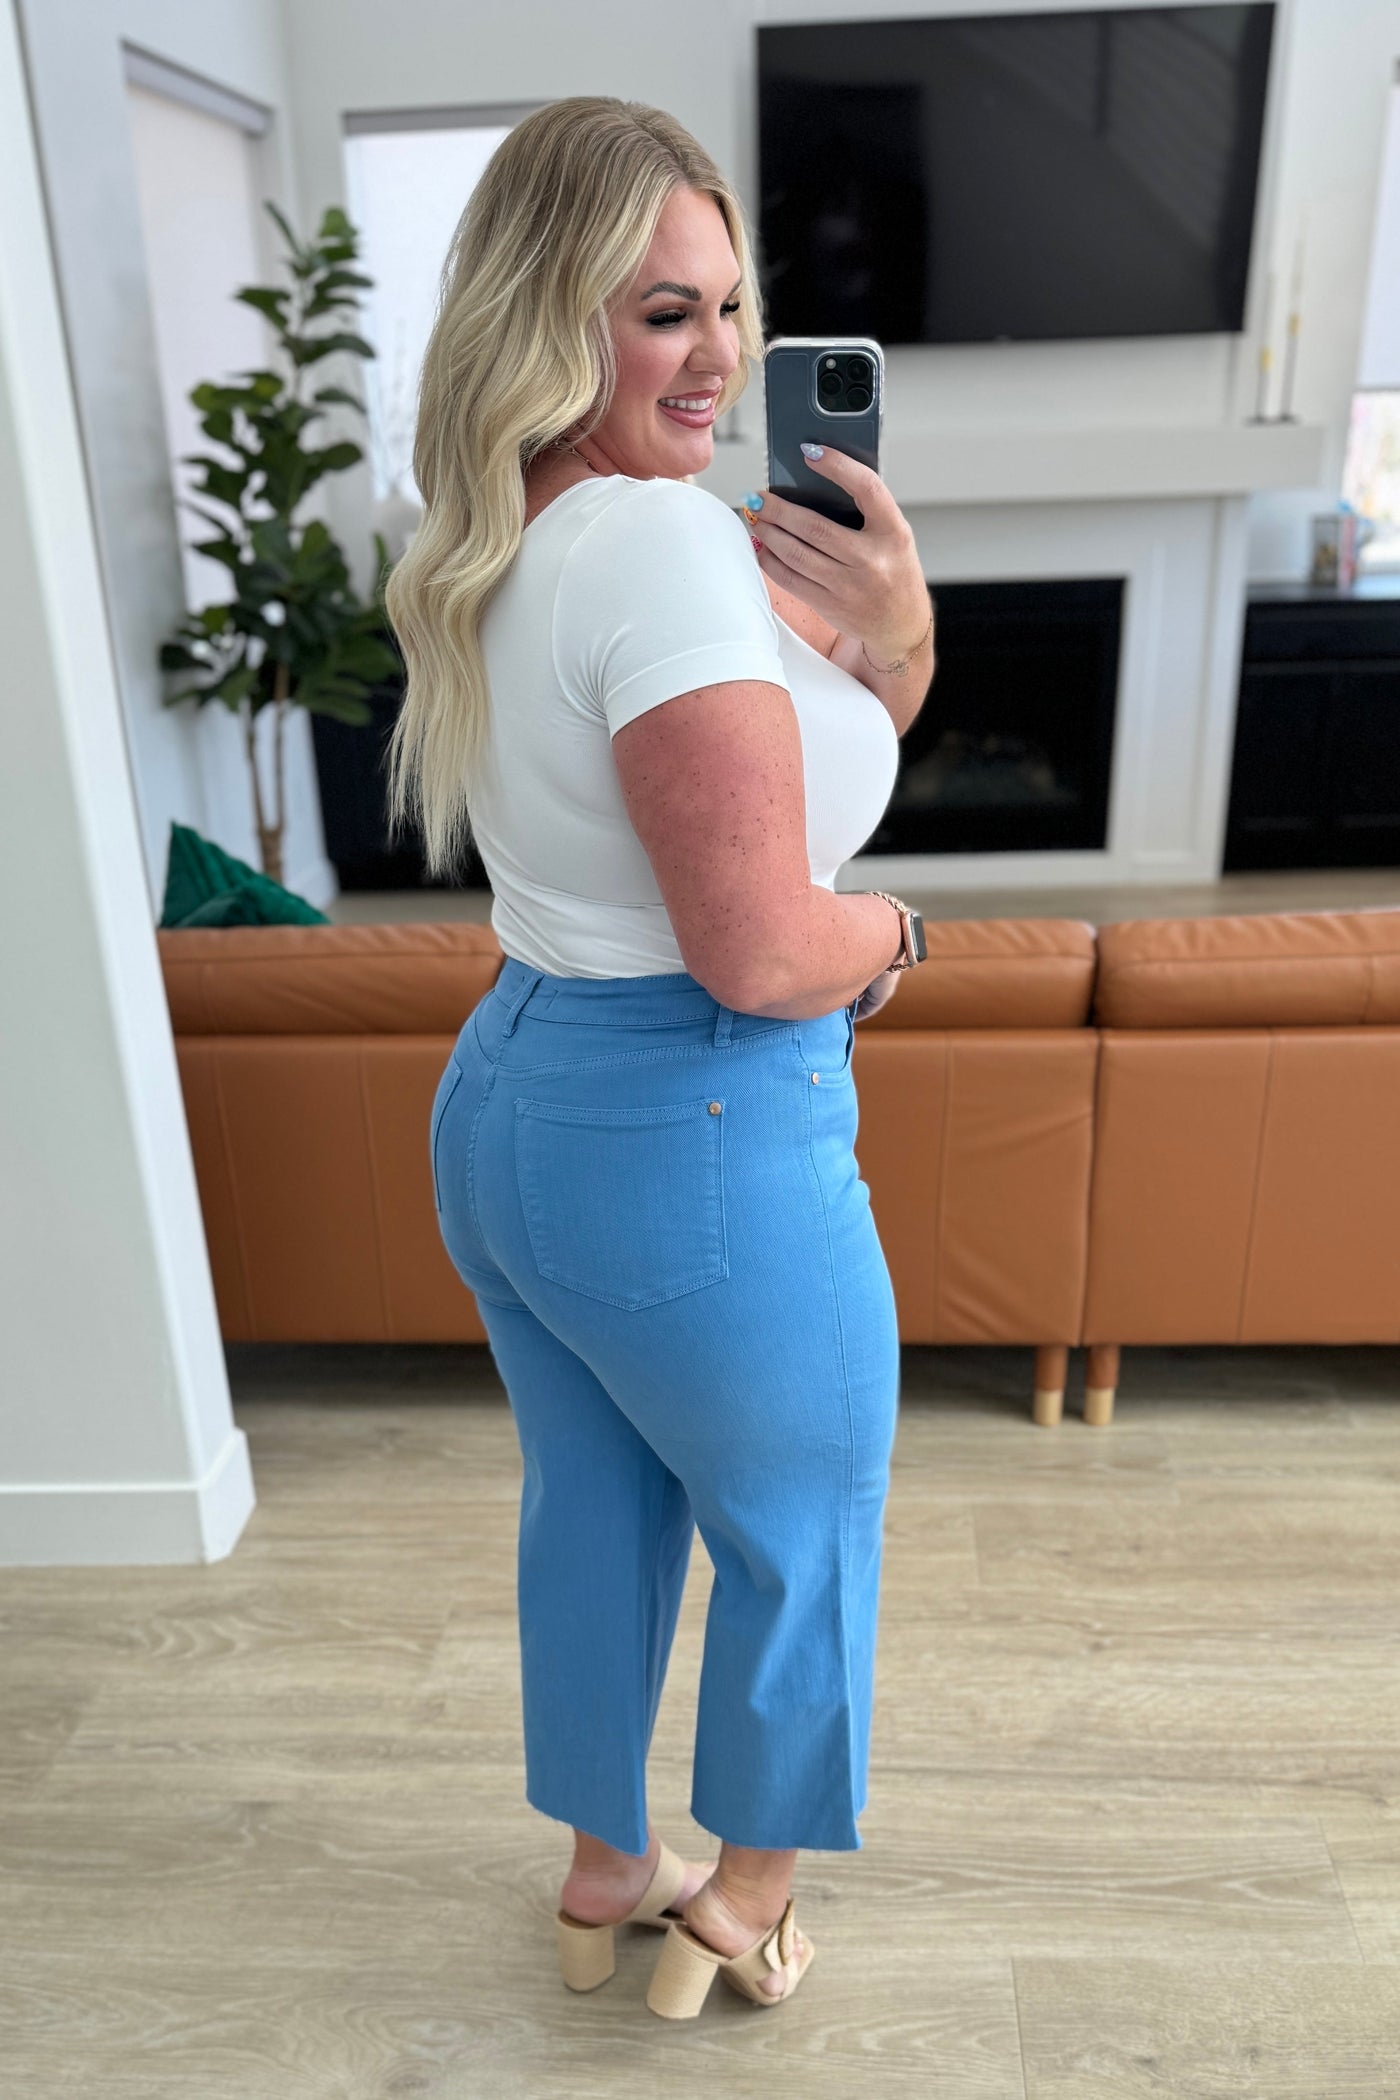 Slip into style and comfort with our Lisa High Rise Control Top Crop Jeans from Judy Blue. Featuring tummy control technology and 4-way stretch, these jeans provide a flattering fit